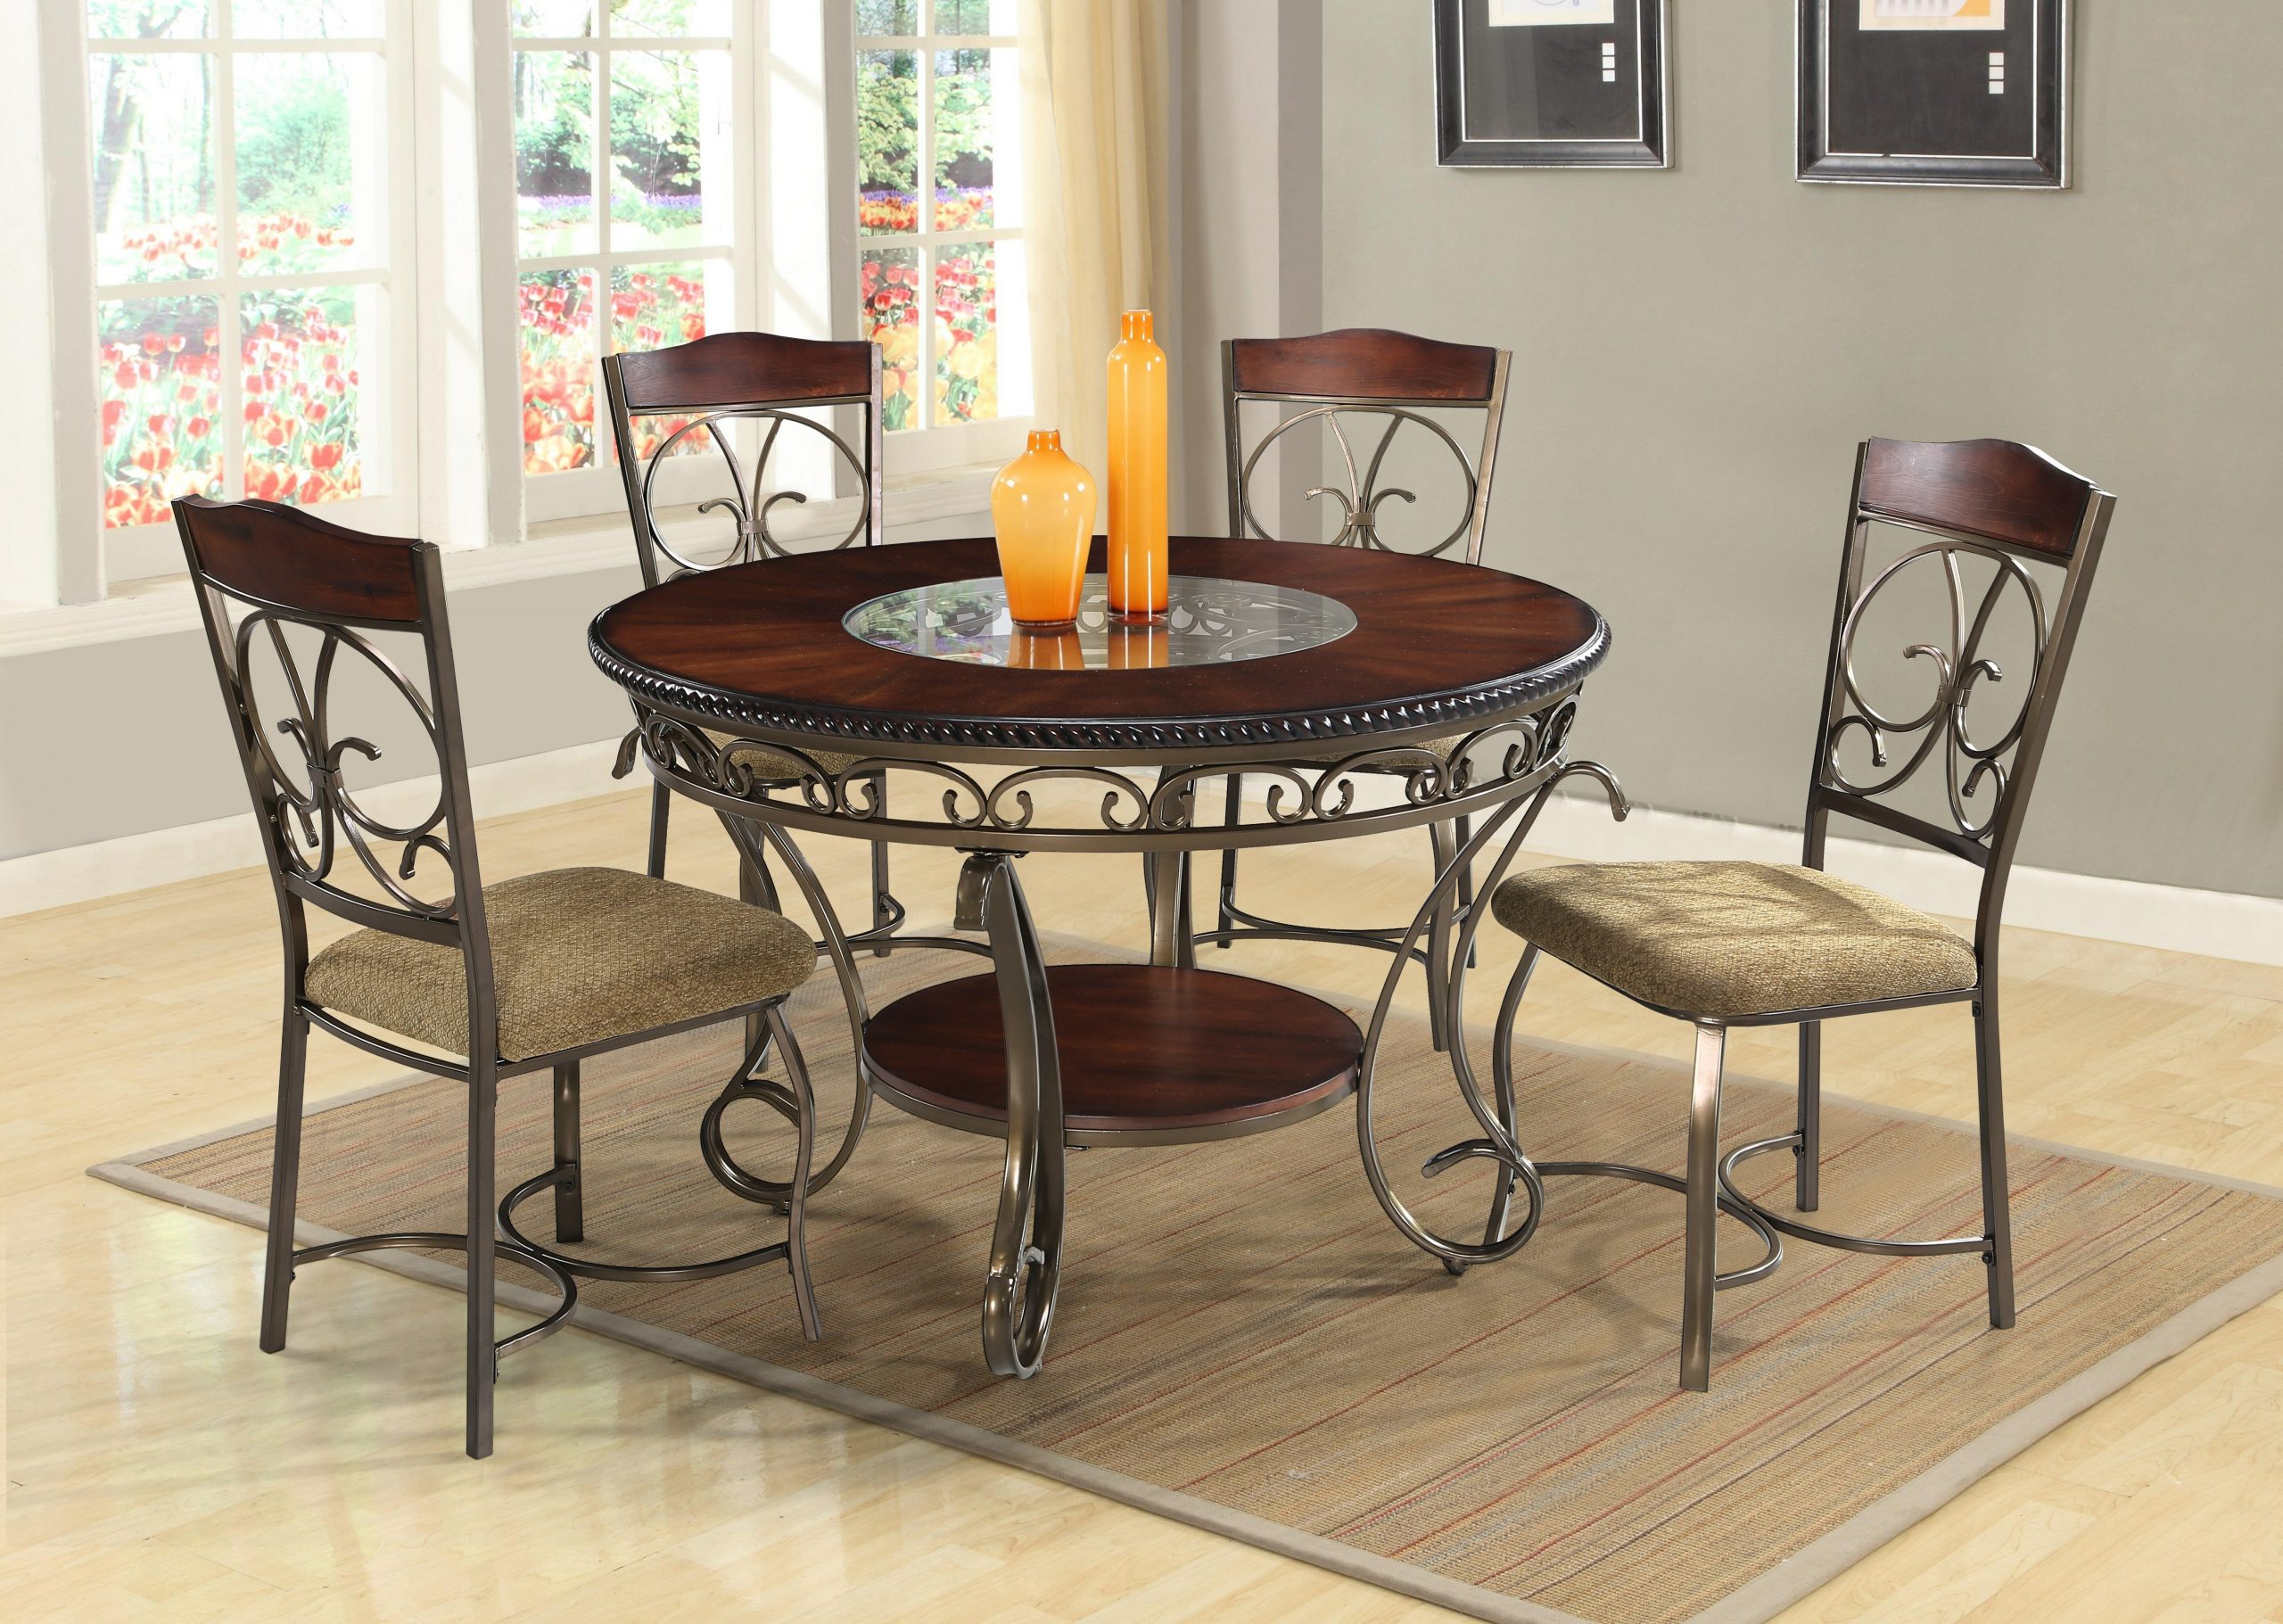 Thomaston 5 Piece Dining Set in proportions 5760 X 4097